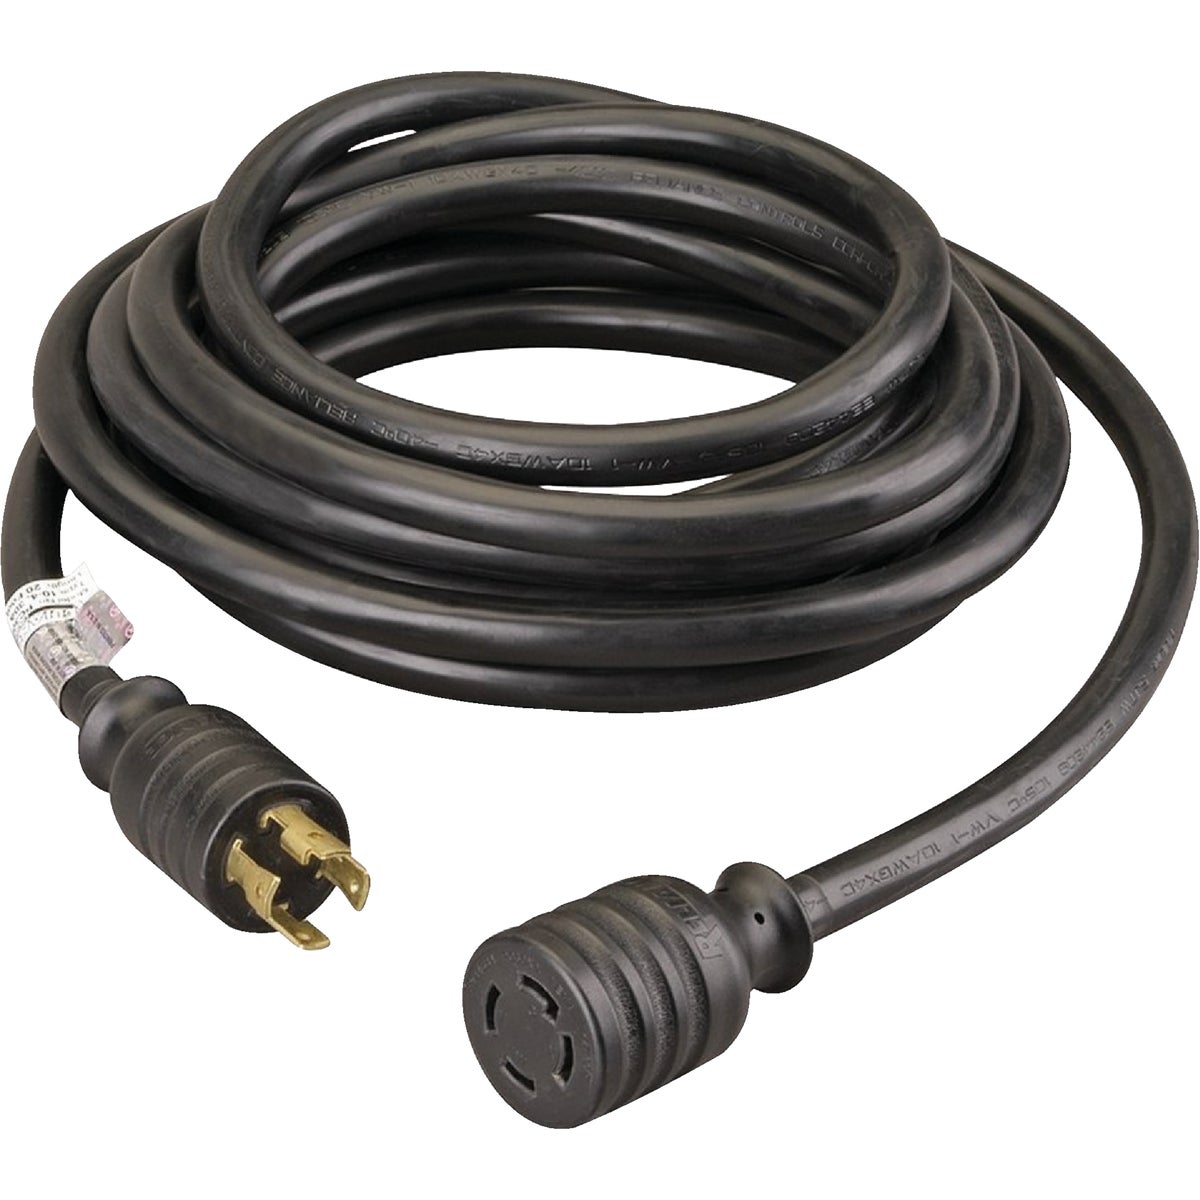 Item 502519, Generator cord designed to connect portable back-up generator to a power 